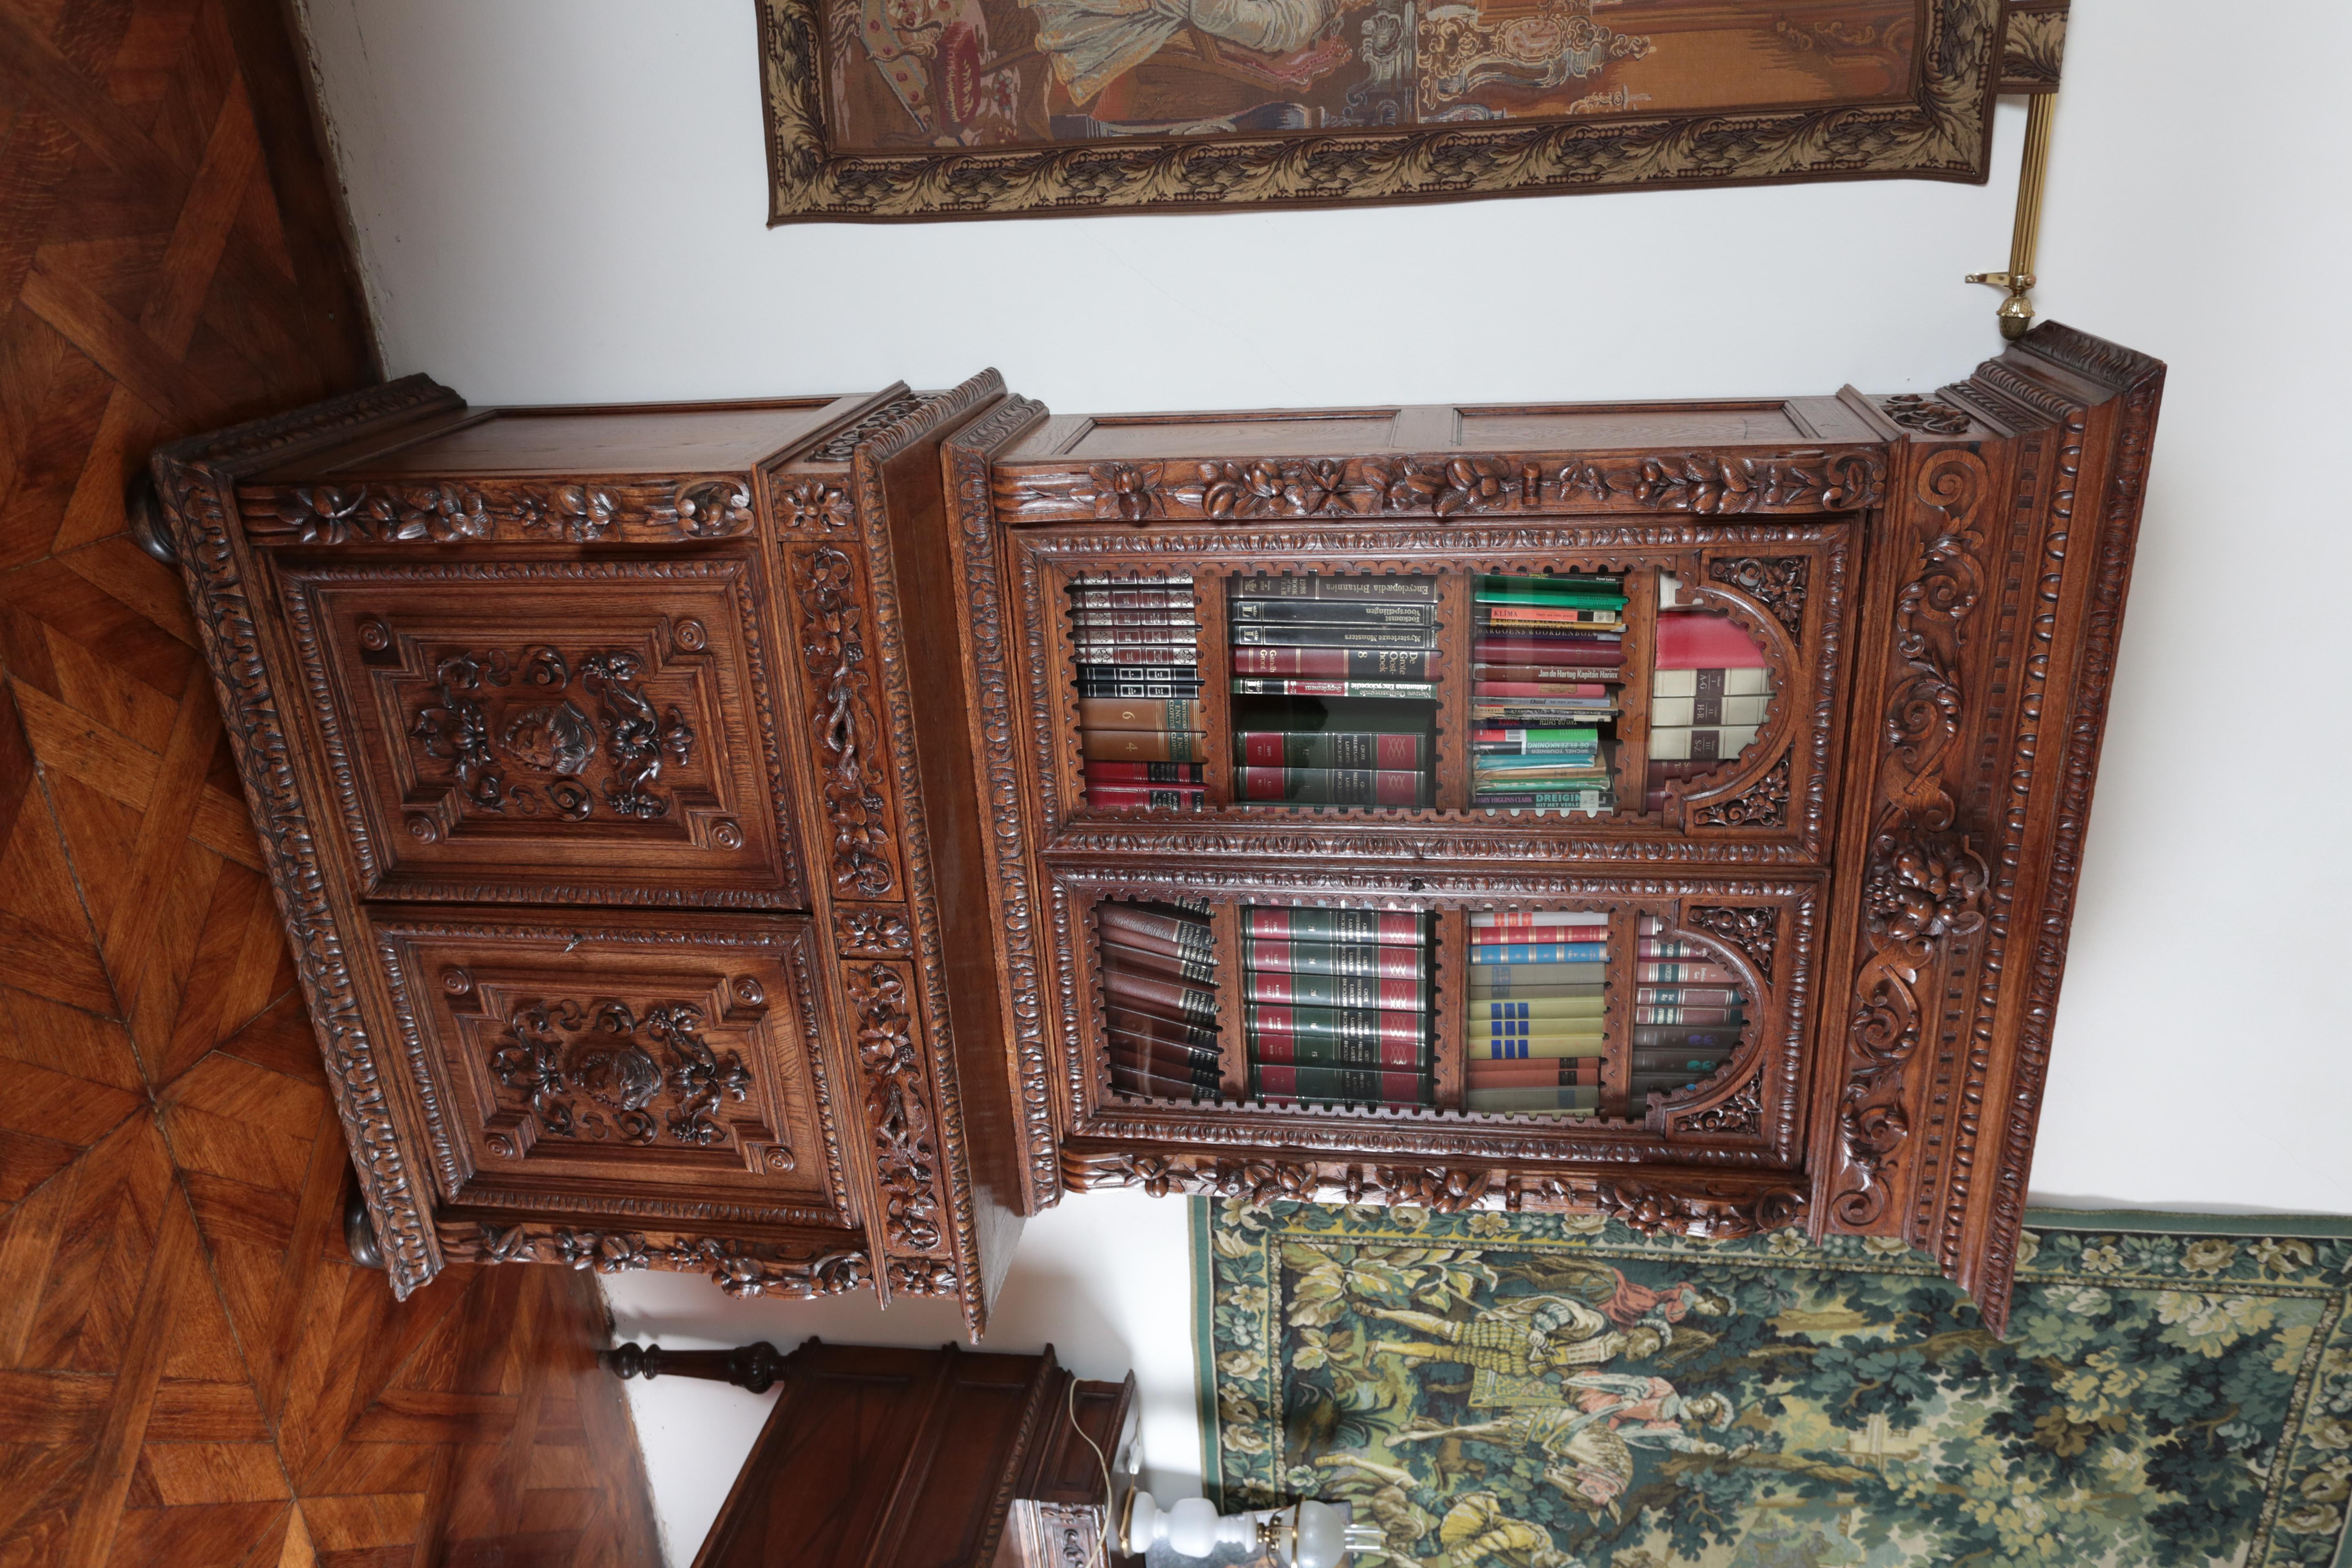 Solid oak sideboard richly carved in the Renaissance style. Precise carving work from the second half of the 19th century. Choice oak. The sideboard / bookcase consists of two parts: an upper glazed chaat with adjustable shelves, a lower part with